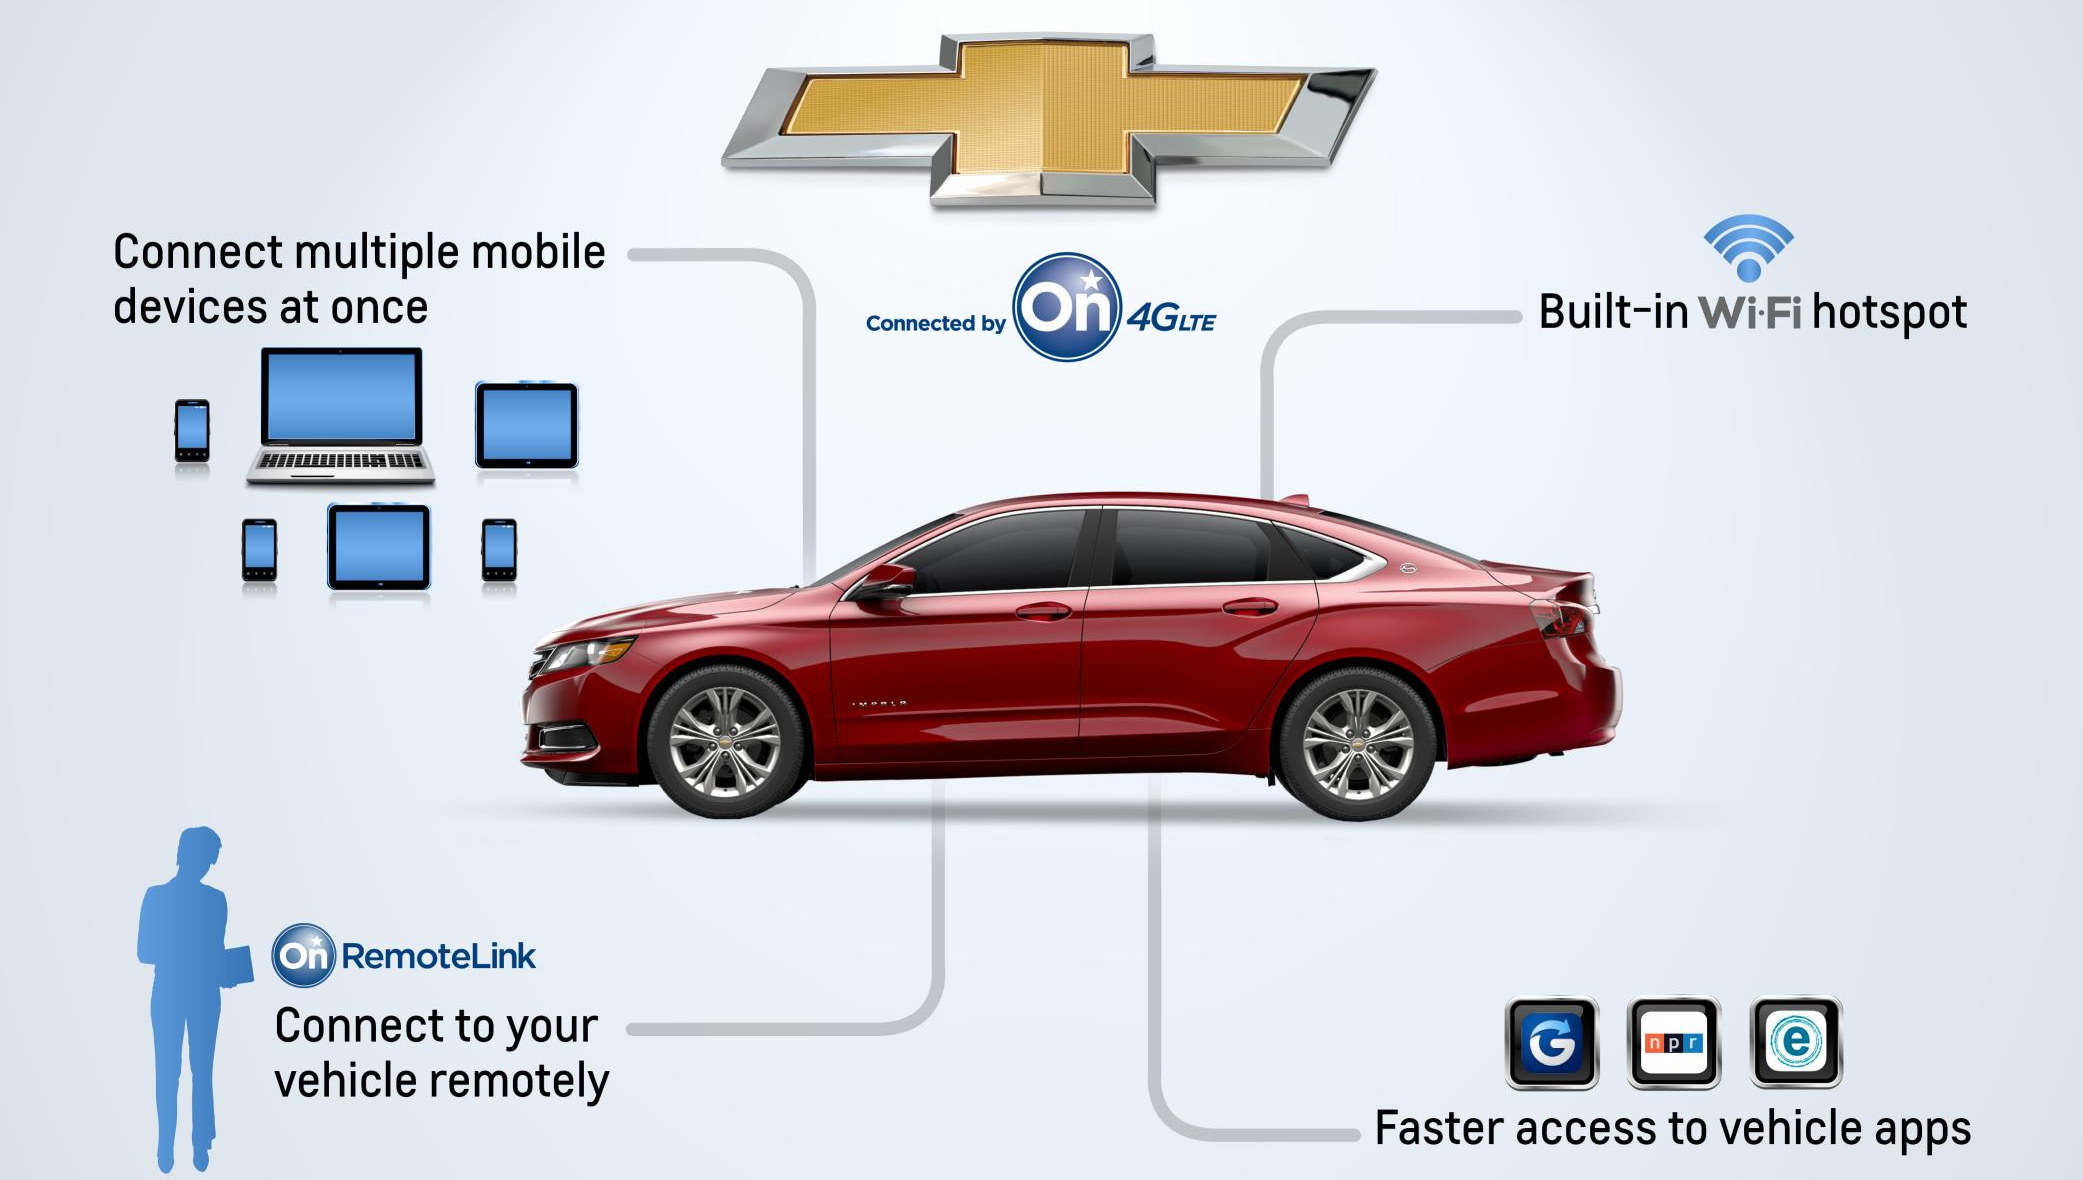 OnStar4G LTE at OnStar to Offer 4G LTE Connection in 2014